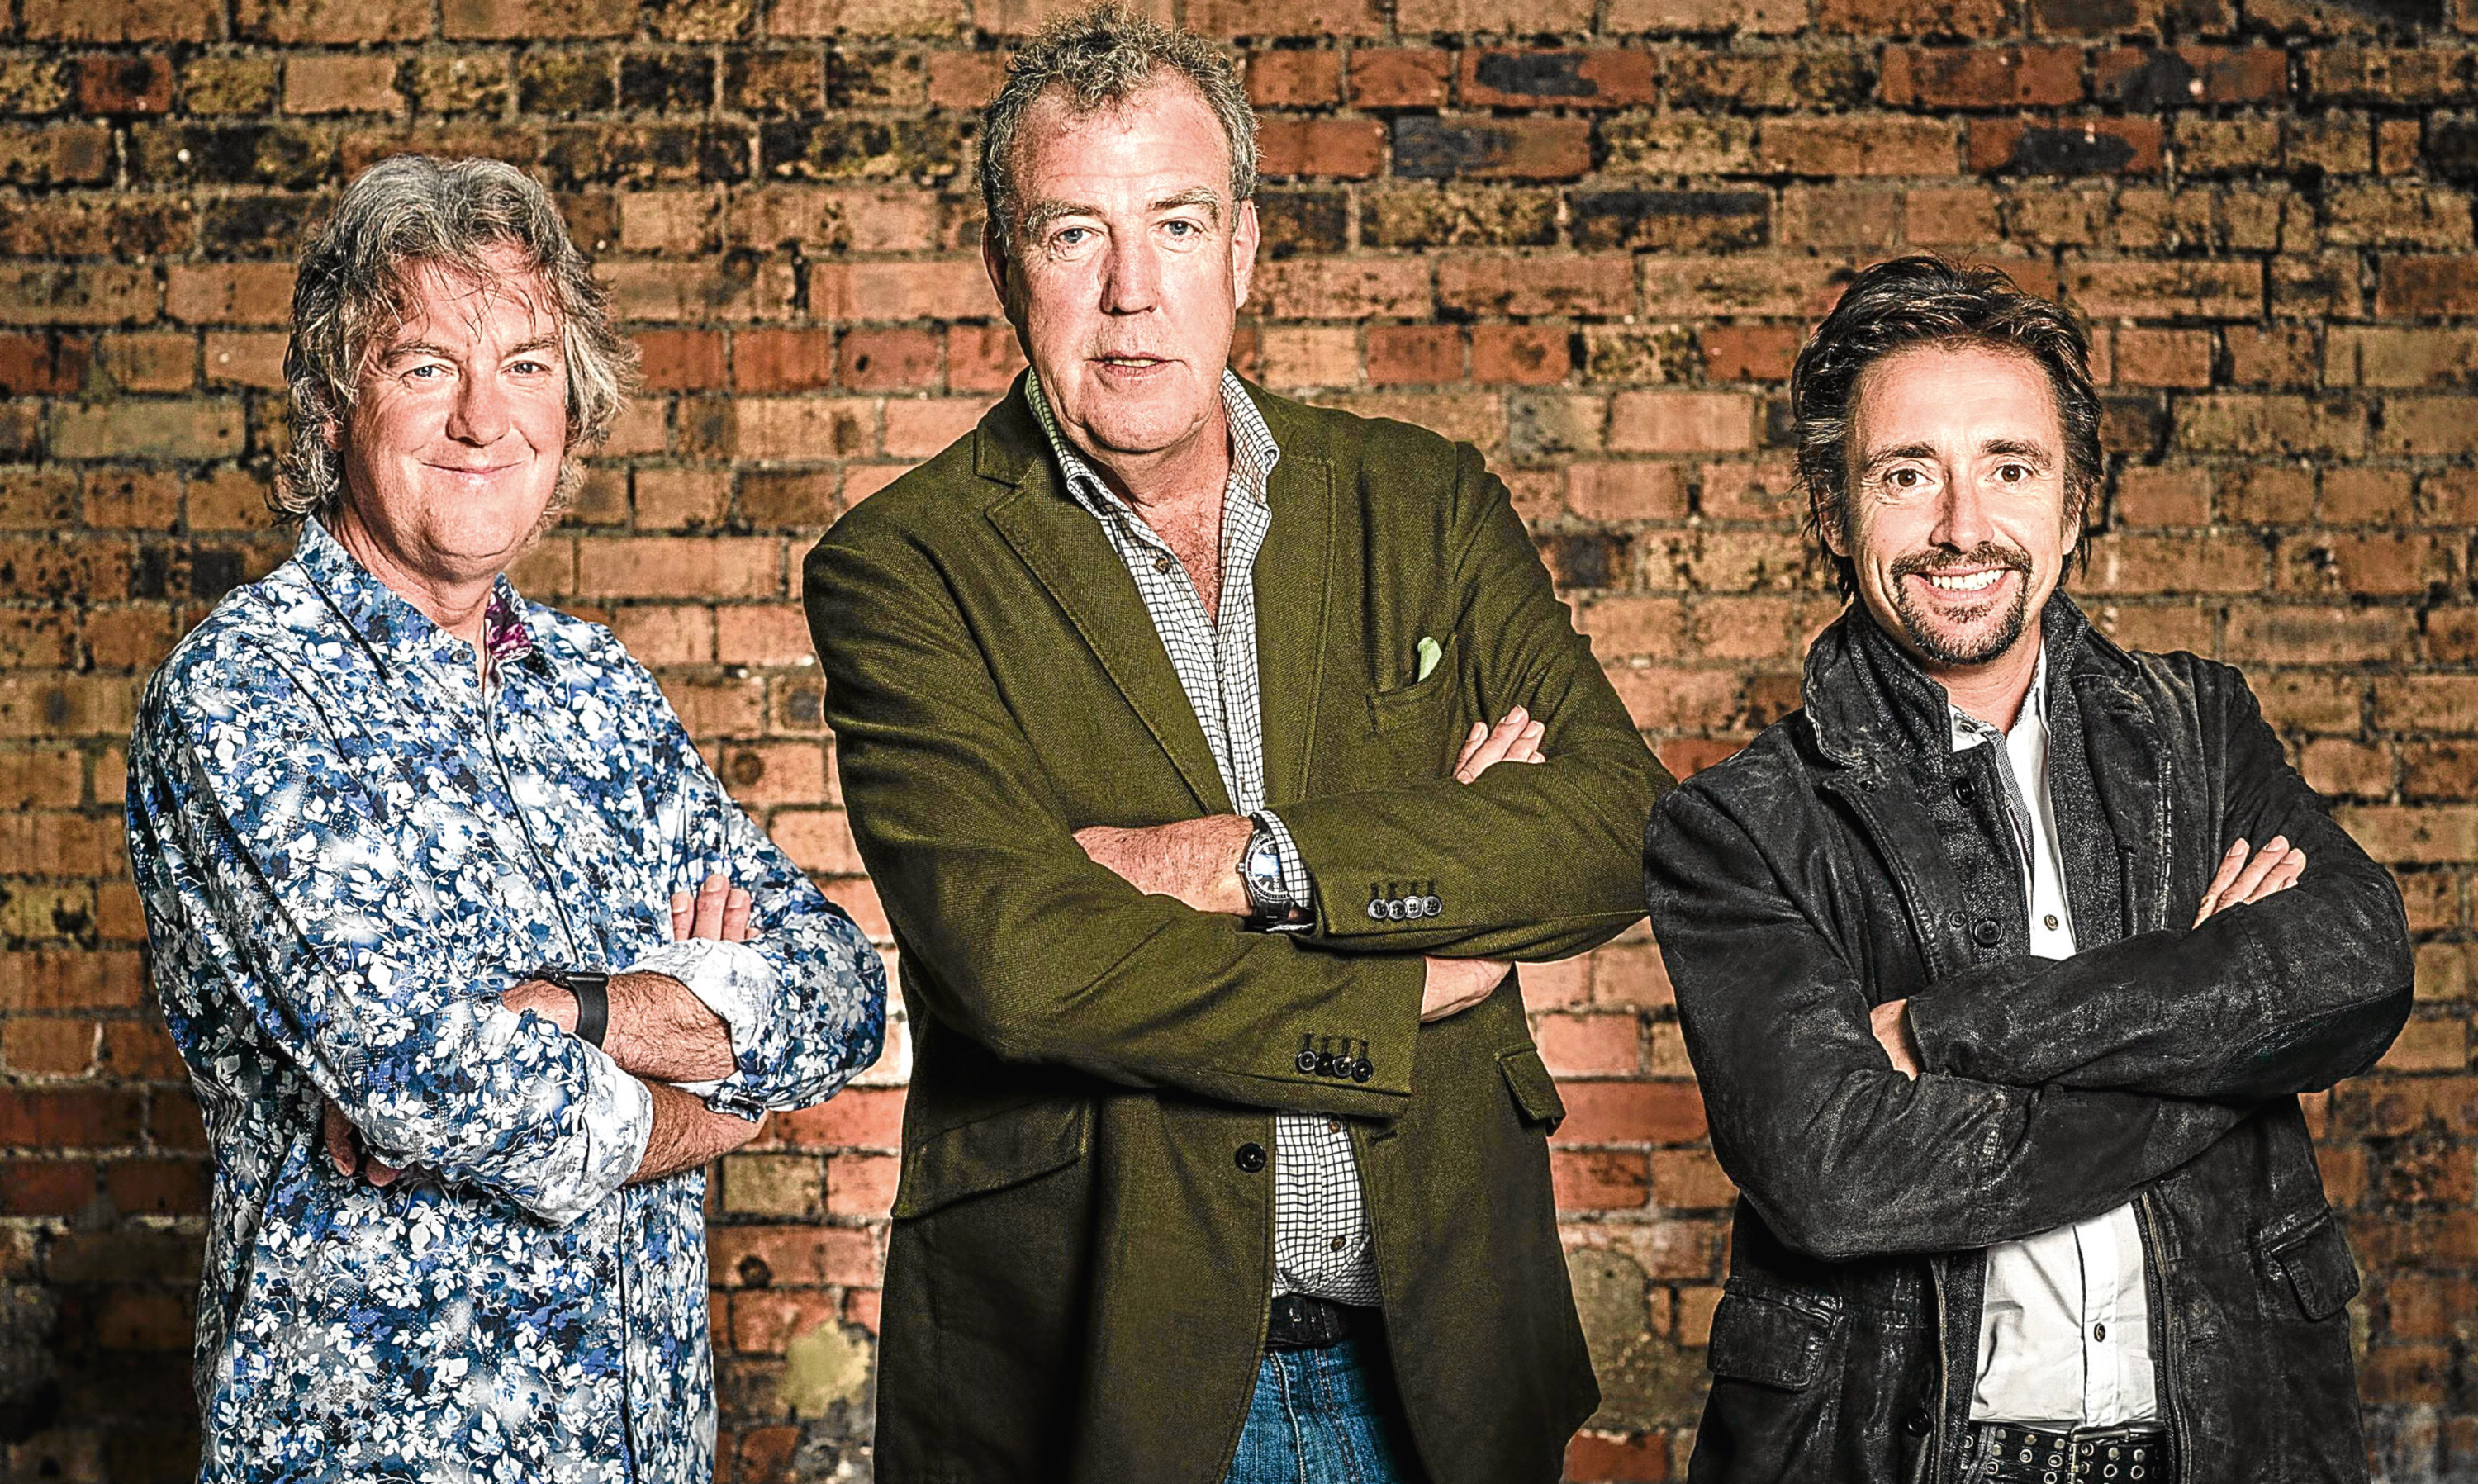 The comments by Richard Hammond, pictured right alongside Jeremy Clarkson and James May, implying only gay people eat ice cream did not amuse Mike one bit.